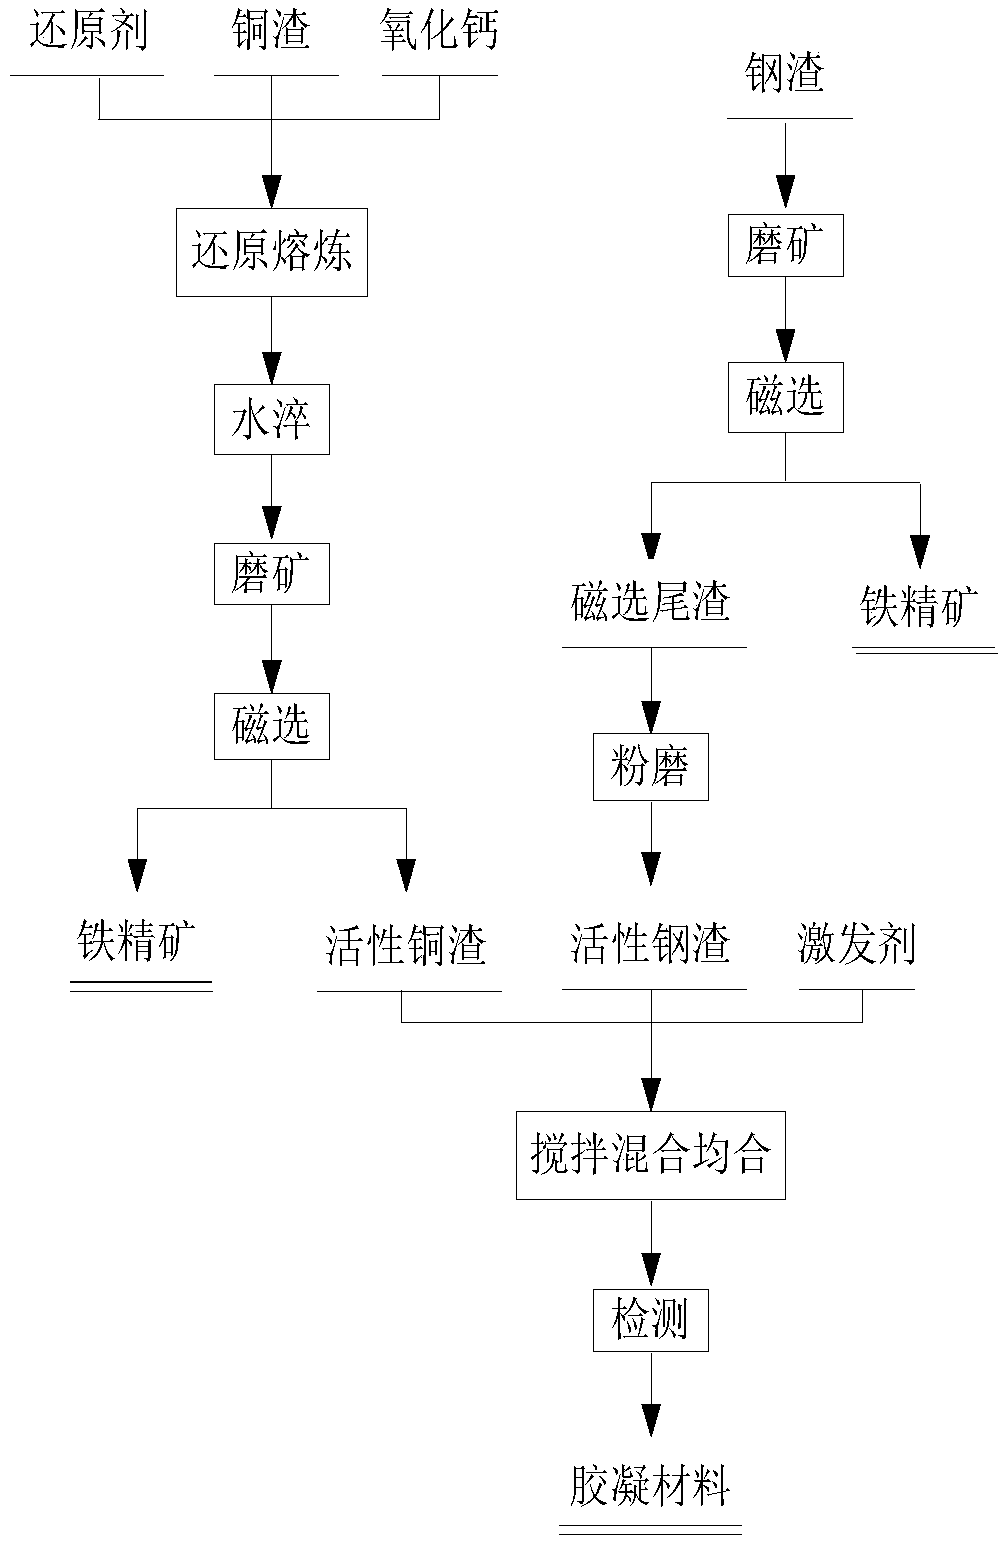 Method for preparing cementing material by using copper slag and steel slag as raw materials